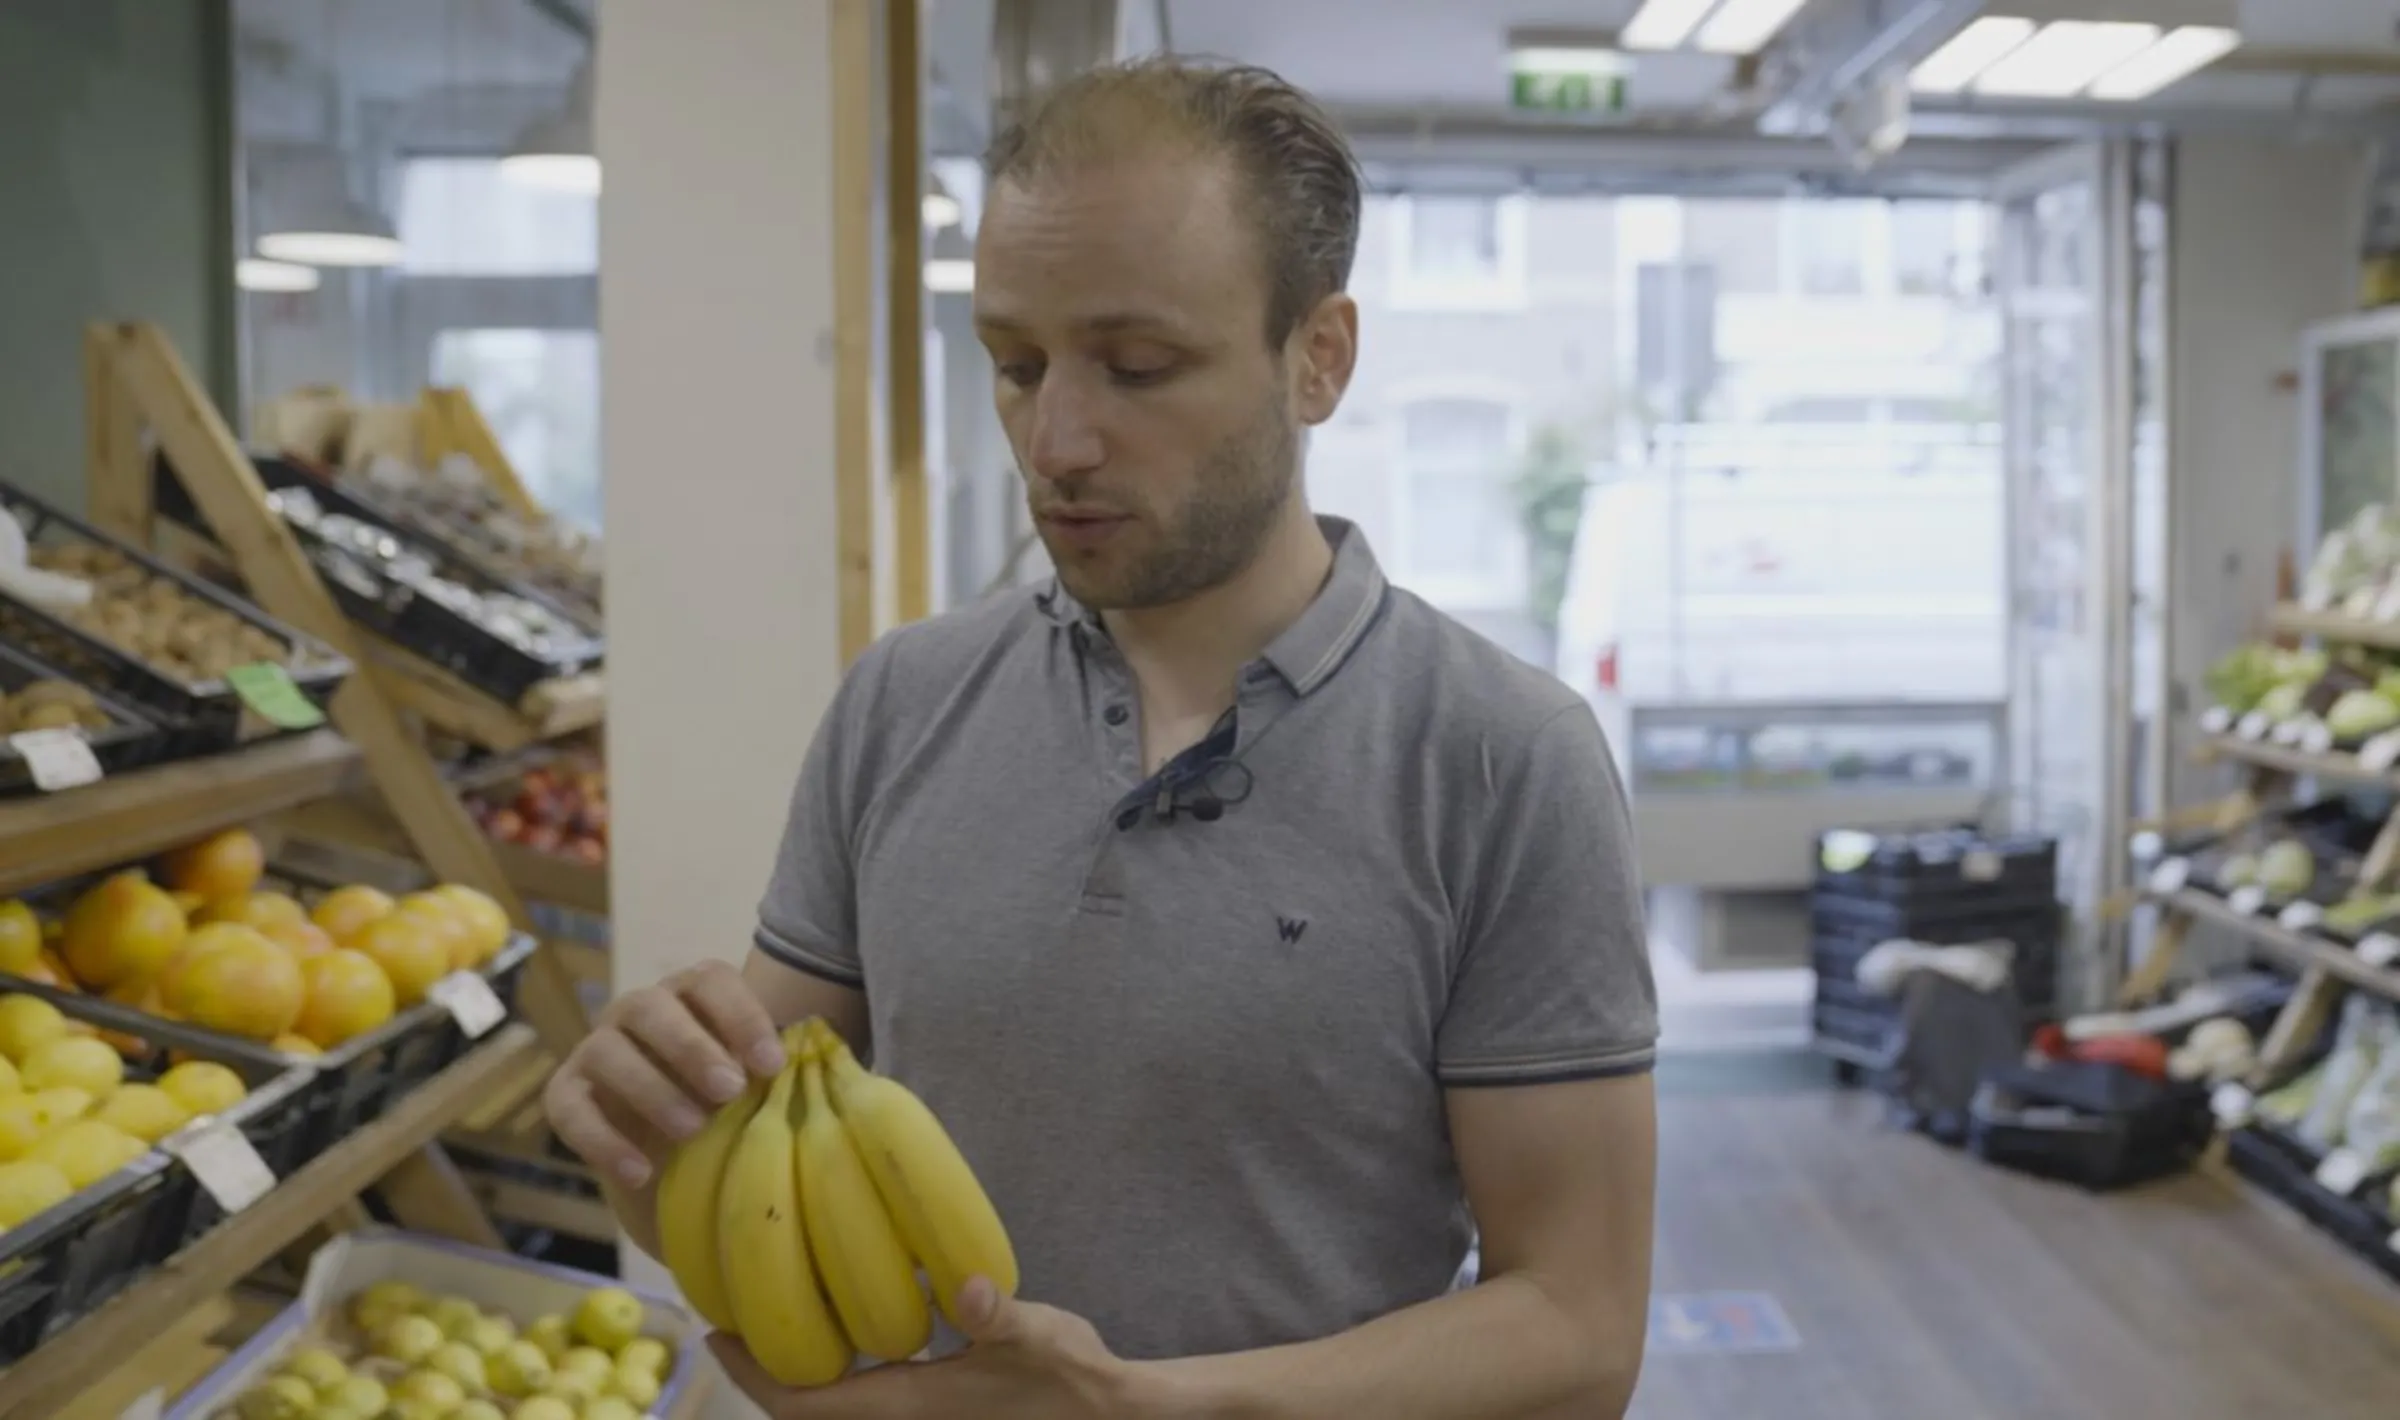 Michael Scholte, co-founder of True Price Initiative looks at bananas in his hand as he walks around a supermarket in Amsterdam, in this still from the video 'This grocery store wants to fix capitalism'. Albert Han/Thomson Reuters Foundation